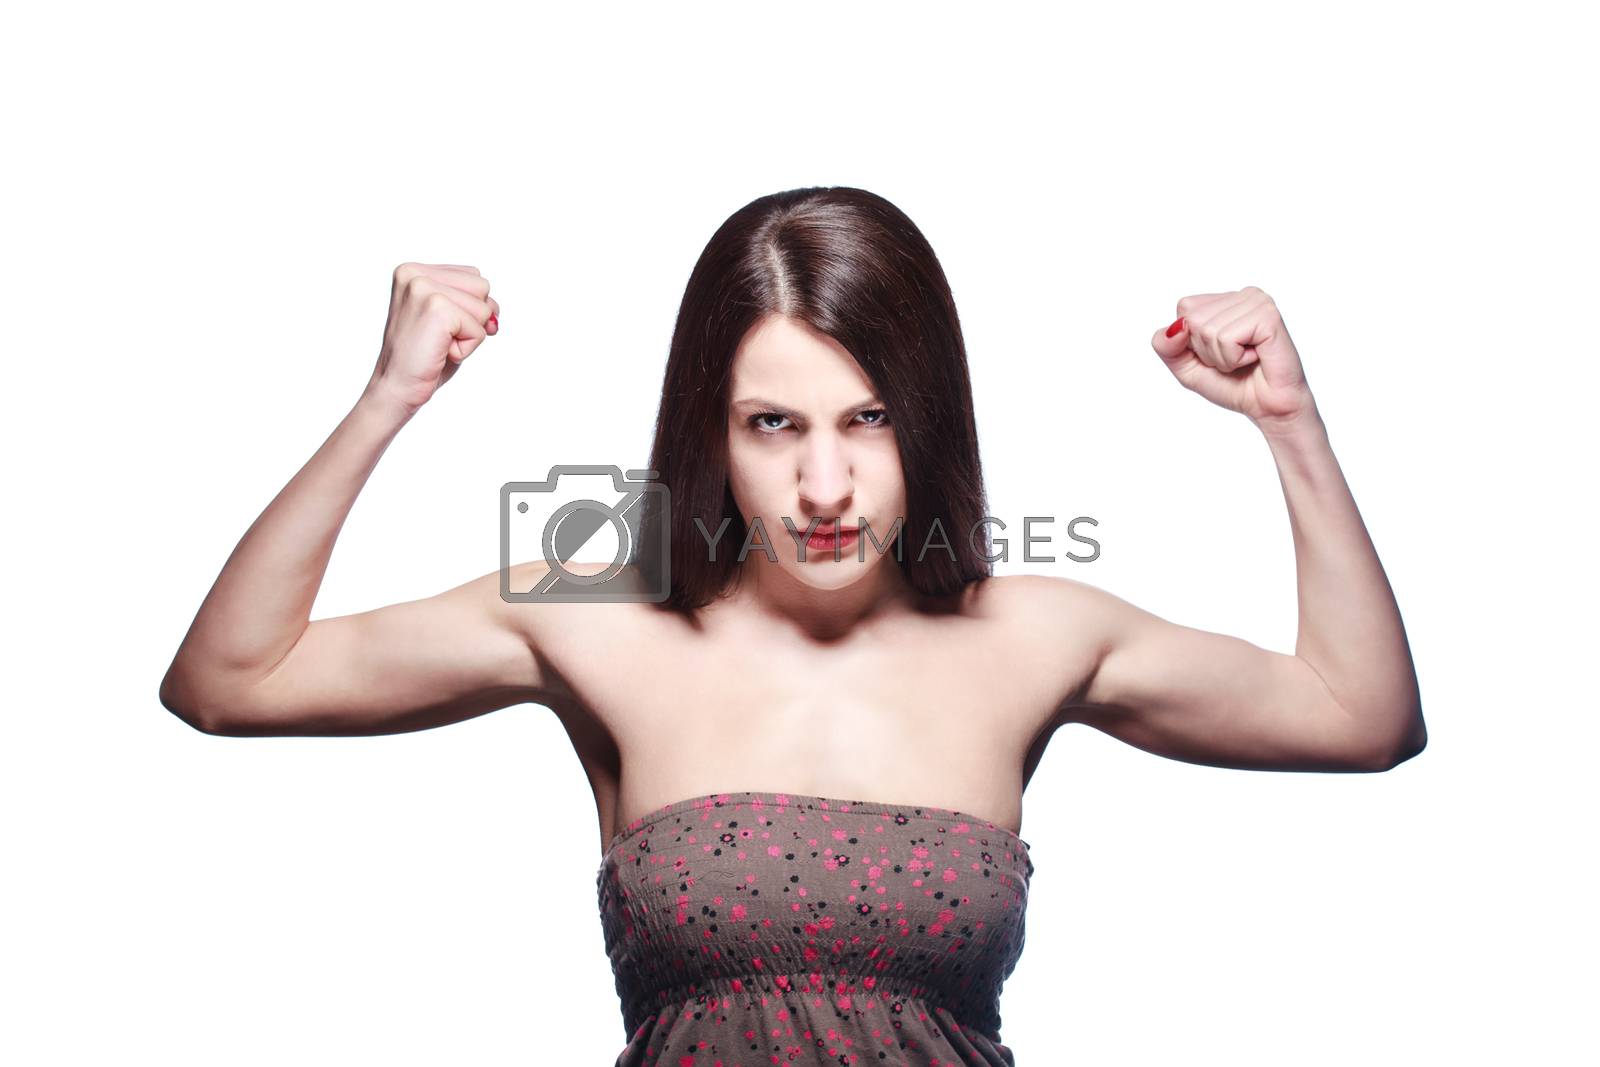 Royalty free image of girl showing muscles by kokimk